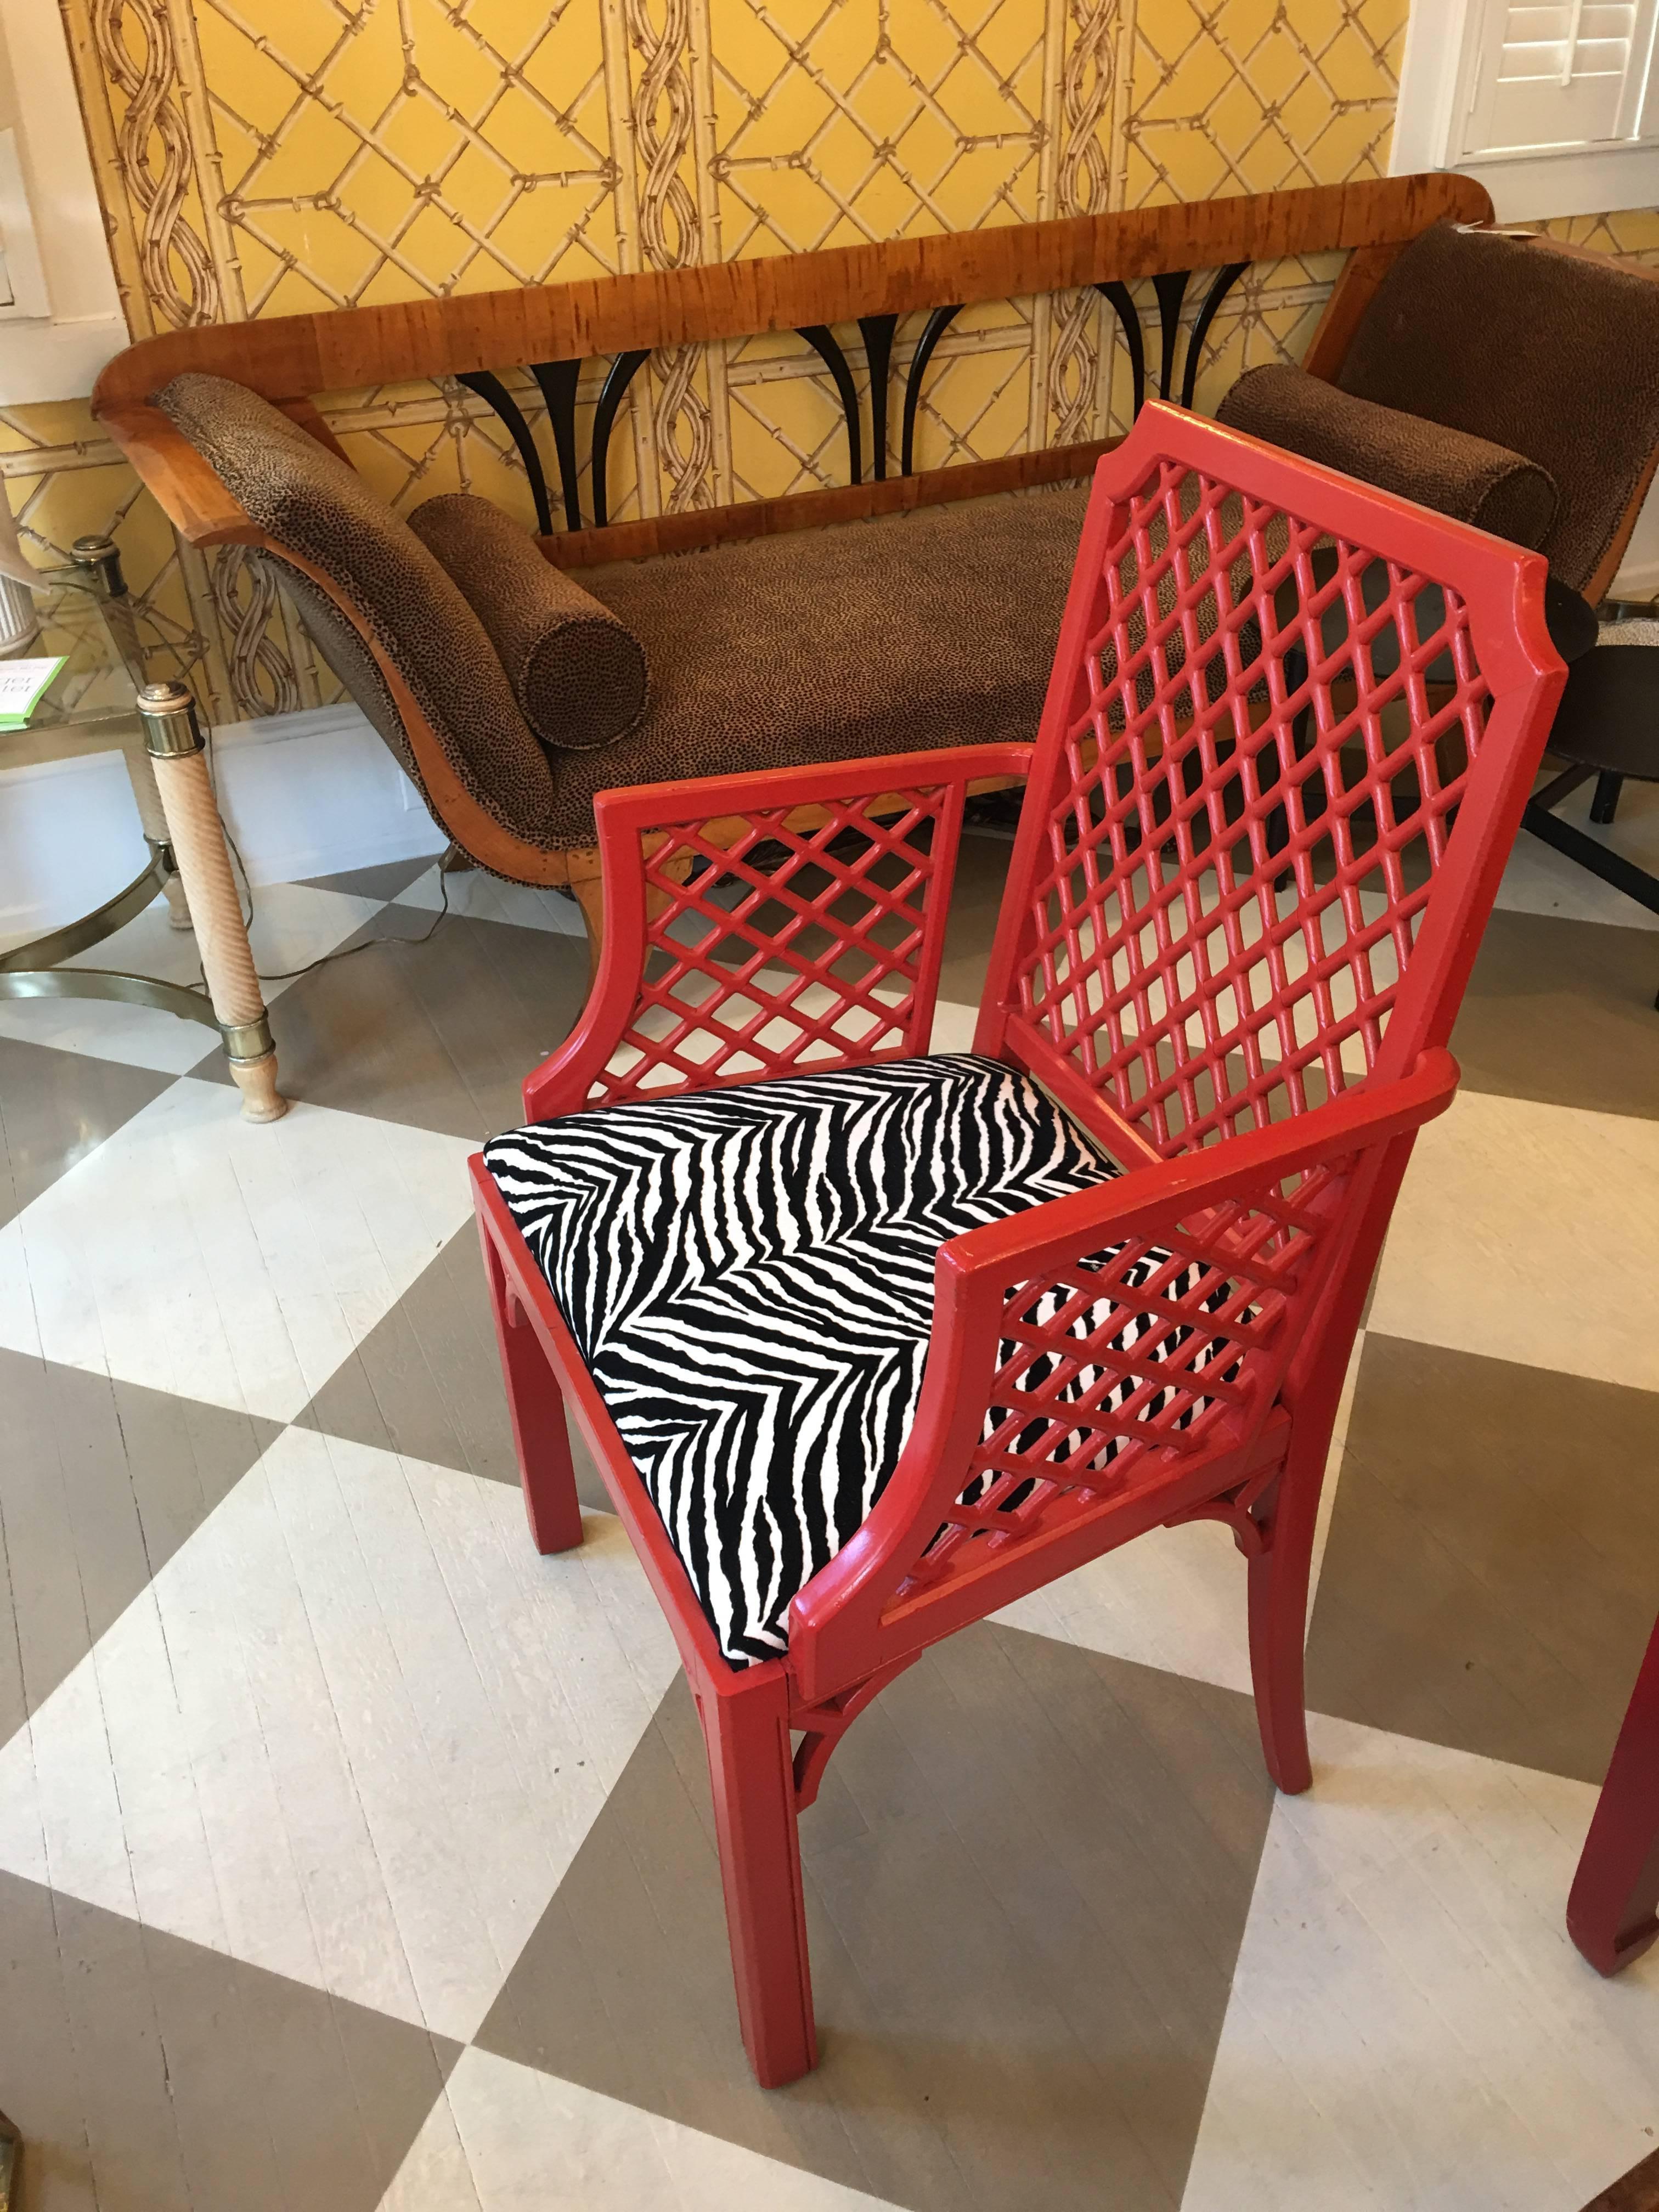 Late midcentury American set of eight red painted Trellis style dining room chairs, circa 1970
having two armchairs, cane seats, and newer zebra cushions.